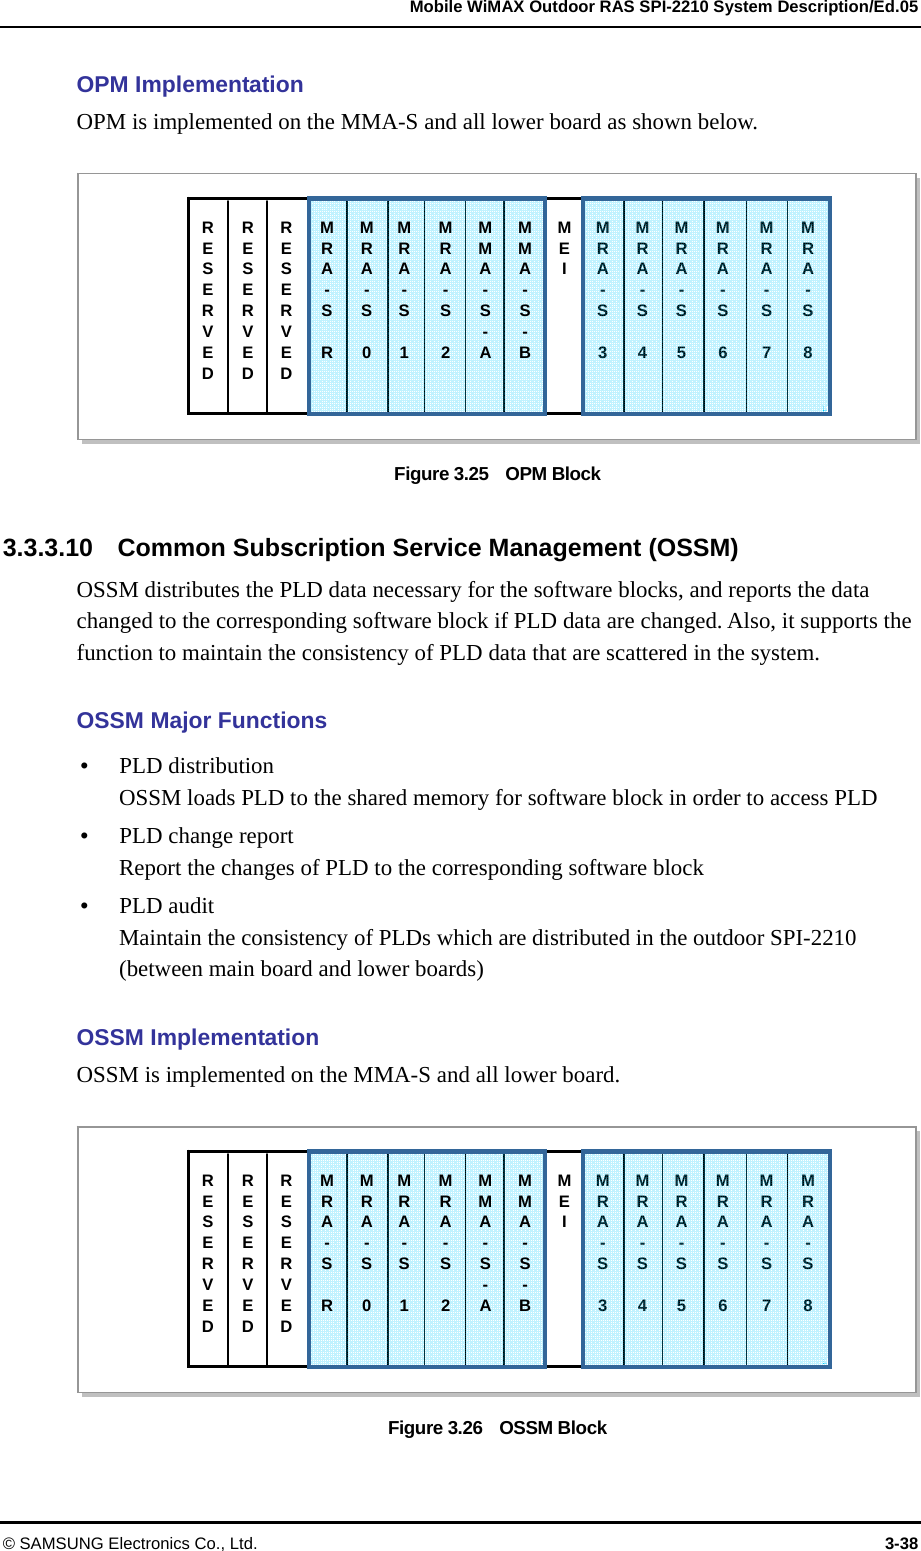   Mobile WiMAX Outdoor RAS SPI-2210 System Description/Ed.05 © SAMSUNG Electronics Co., Ltd.  3-38 OPM Implementation OPM is implemented on the MMA-S and all lower board as shown below.  Figure 3.25    OPM Block  3.3.3.10    Common Subscription Service Management (OSSM) OSSM distributes the PLD data necessary for the software blocks, and reports the data changed to the corresponding software block if PLD data are changed. Also, it supports the function to maintain the consistency of PLD data that are scattered in the system.    OSSM Major Functions  PLD distribution OSSM loads PLD to the shared memory for software block in order to access PLD  PLD change report   Report the changes of PLD to the corresponding software block  PLD audit   Maintain the consistency of PLDs which are distributed in the outdoor SPI-2210 (between main board and lower boards)  OSSM Implementation OSSM is implemented on the MMA-S and all lower board.  Figure 3.26    OSSM Block RESERVED MRA- S  R MMA-S- AMMA-S- BMEI RESERVED RESERVED MRA- S 0MRA- S 1MRA- S 2MRA- S 3MRA- S 4MRA- S 5MRA- S 6MRA- S  7 MRA- S  8 RESERVED MRA- S  R MMA-S- AMMA-S- BMEI RESERVED RESERVED MRA- S 0MRA- S 1MRA- S 2MRA- S 3MRA- S 4MRA- S 5MRA- S 6MRA- S  7 MRA- S  8 